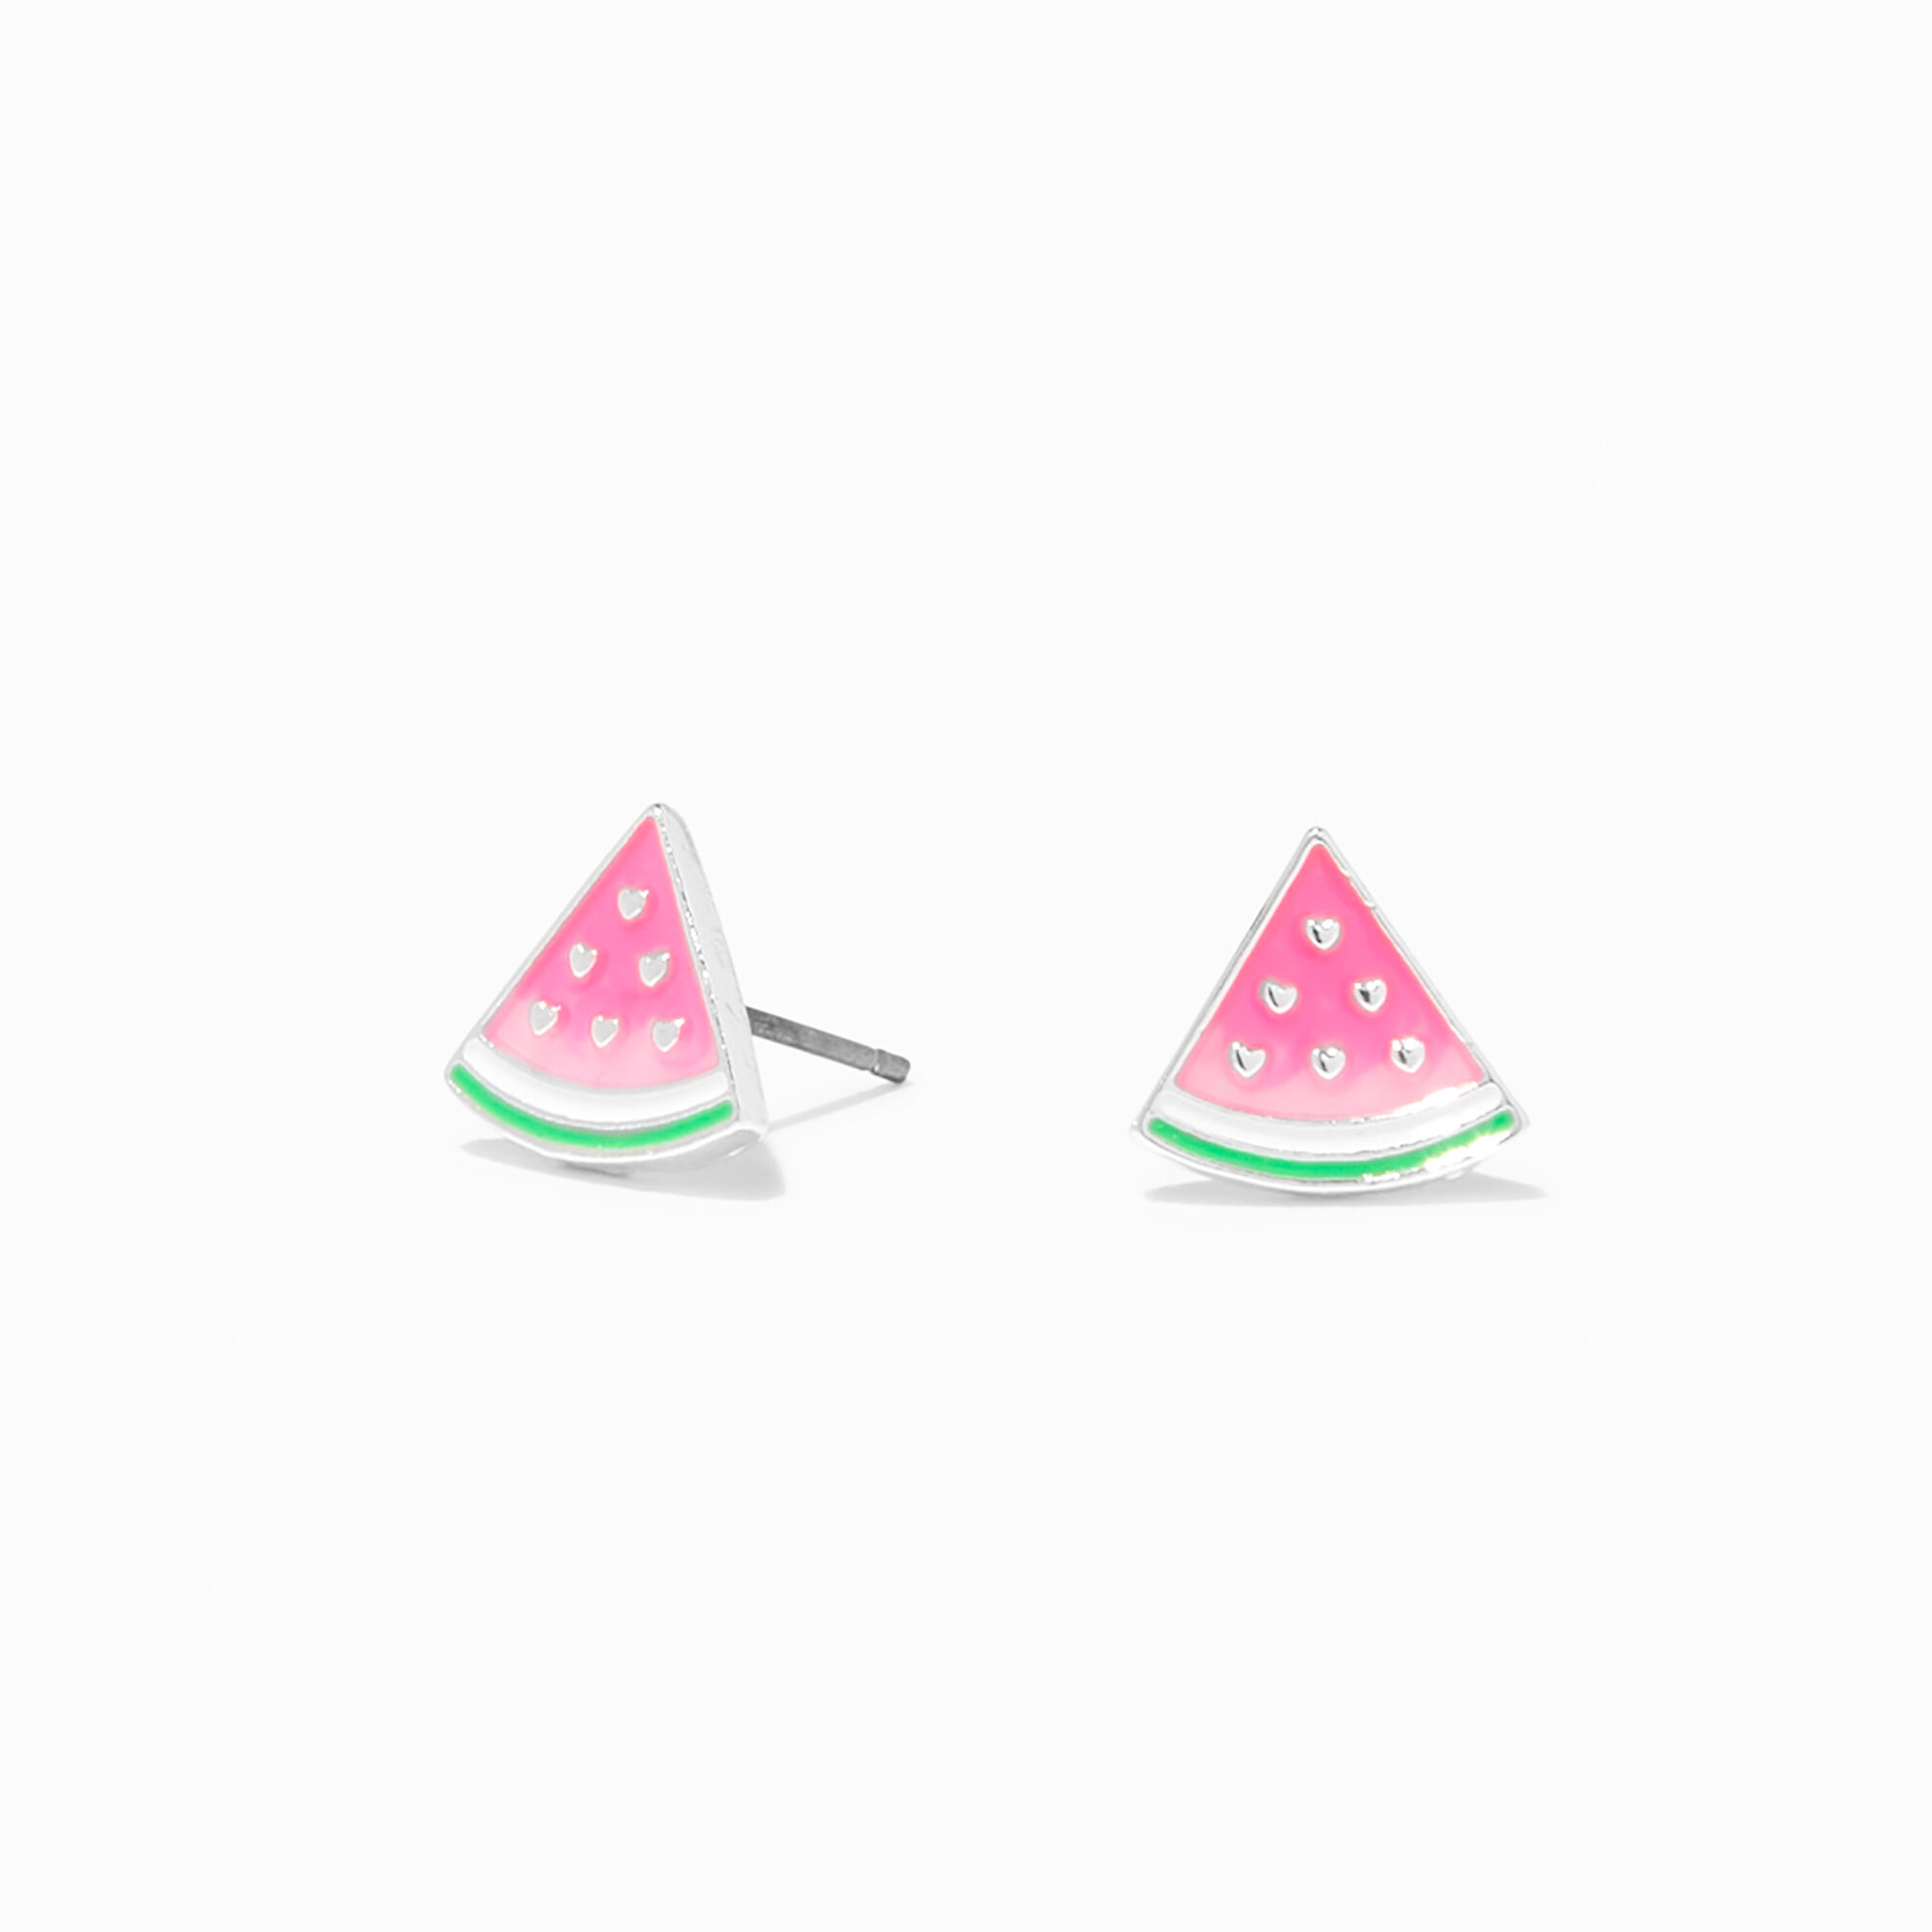 View Claires Uv ColorChanging Watermelon Stud Earrings Pink information